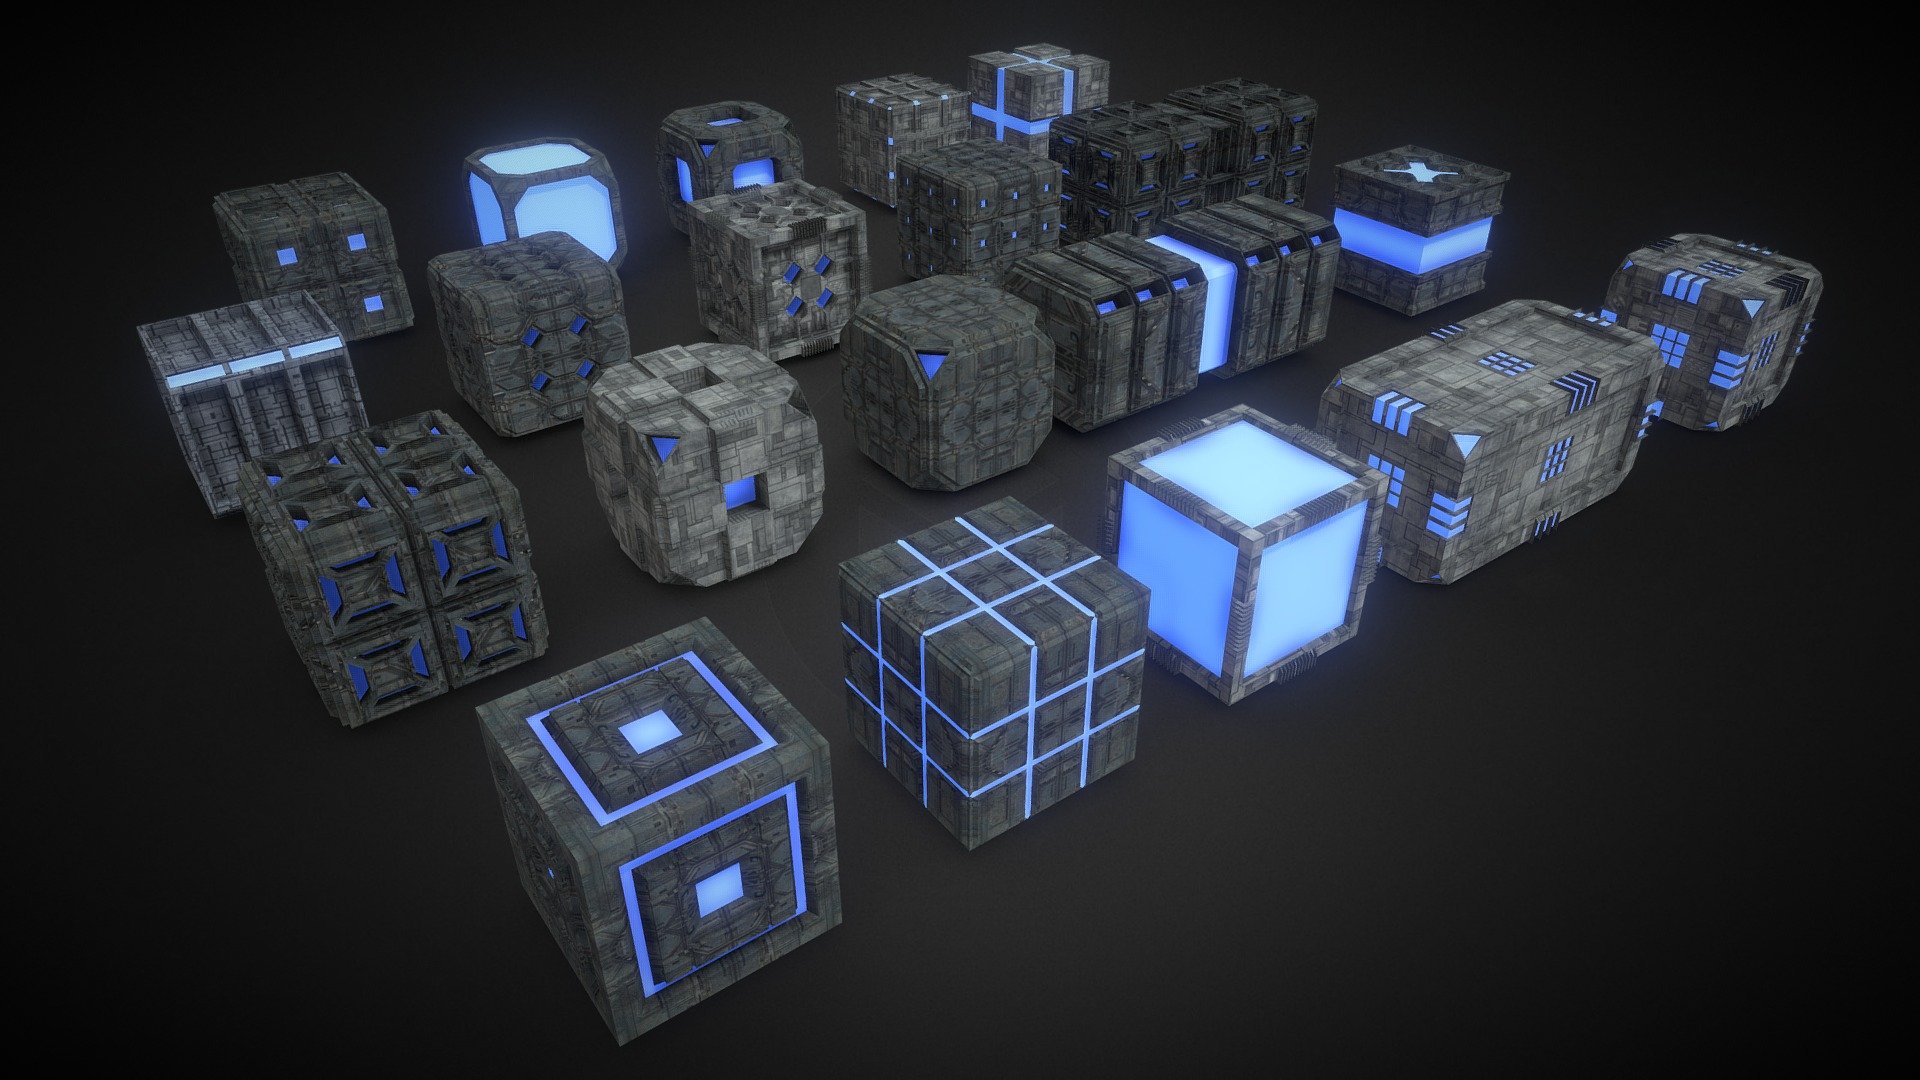 Sci-Fi Box Collection is a Sci-Fi prop. The attributes are given below

1 20 Sci-Fi Box model is in the pack
2 All of them are low poly
3 Texture and material assigned
4 Box UVW mapping is applied.
5 Its a props asset
6 Ready for game use.

I hope this project will be a favorite for everyone. please support me and share this asset. Have a nice day everyone.

Thanks :) - Sci-Fi Box Collection - Buy Royalty Free 3D model by Md Waziullah Apu (@ApuArt) 3d model